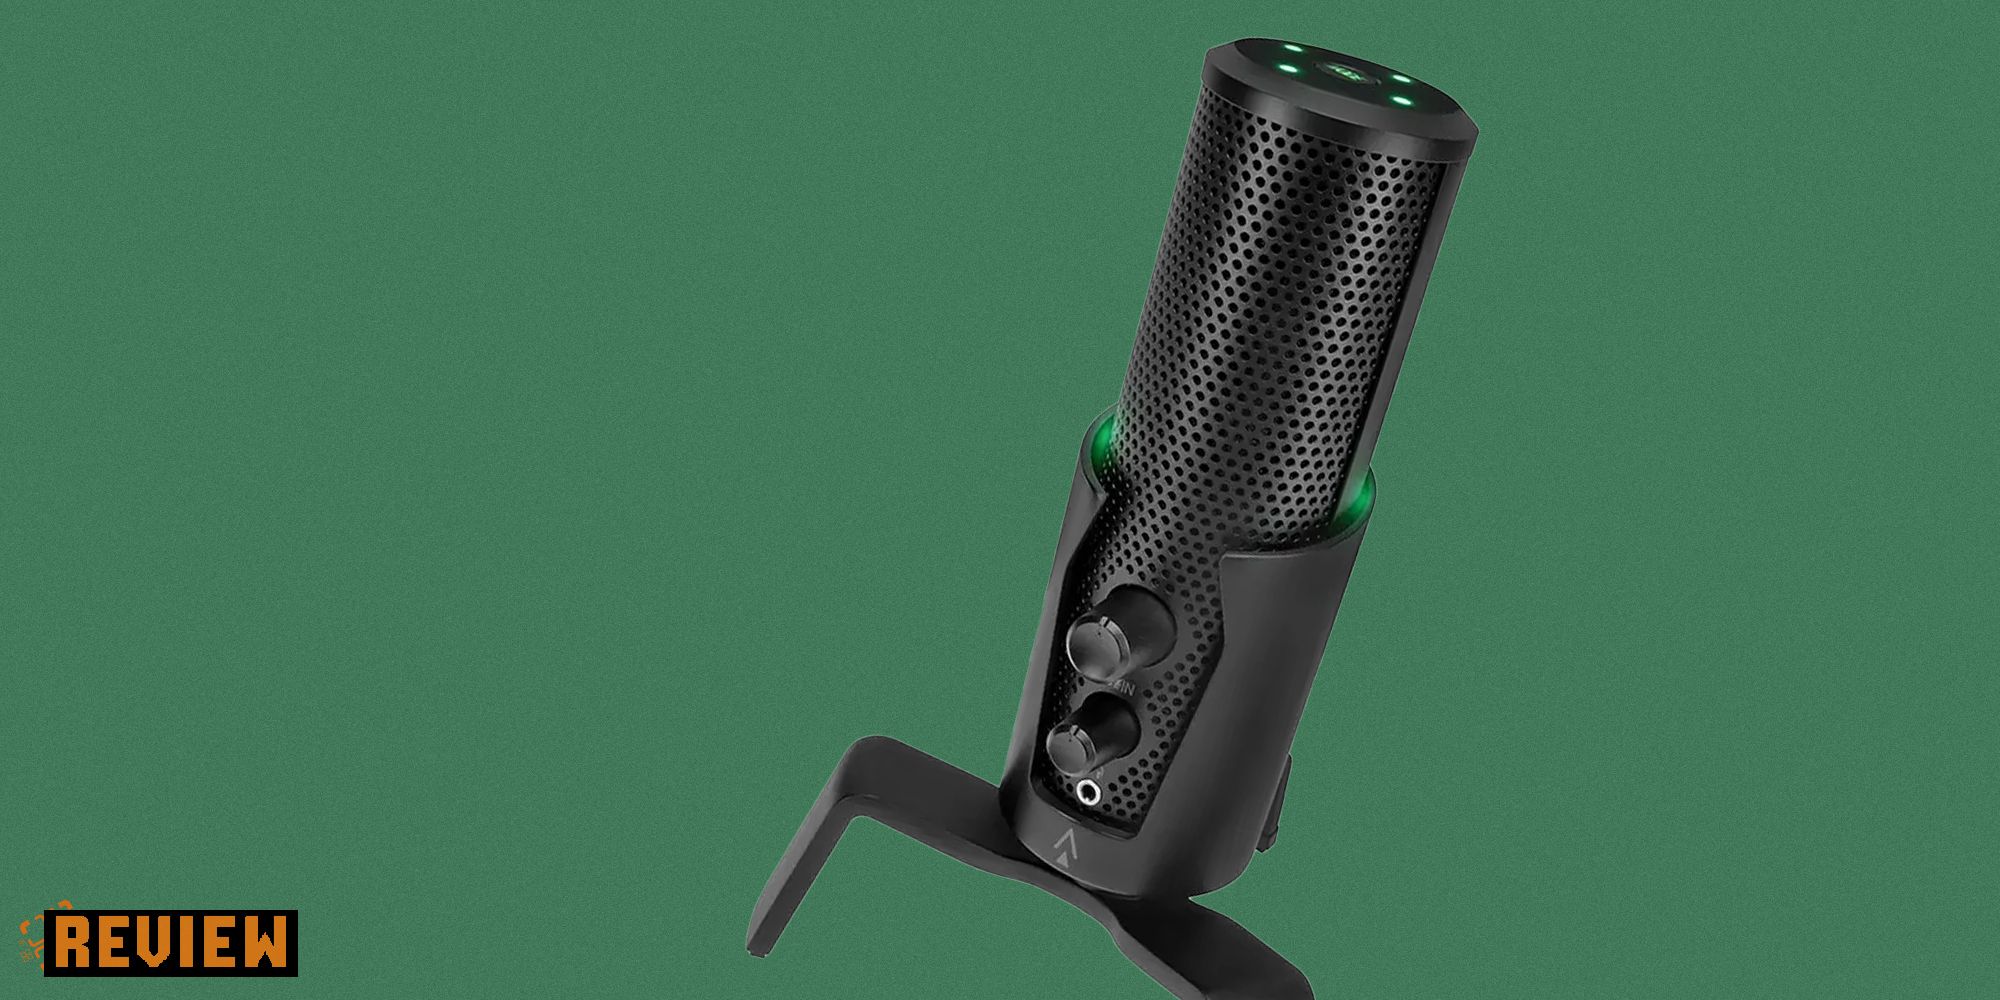 Dark Matter Sentry Streaming Microphone Review: The Good, The Bad, And The Ugly